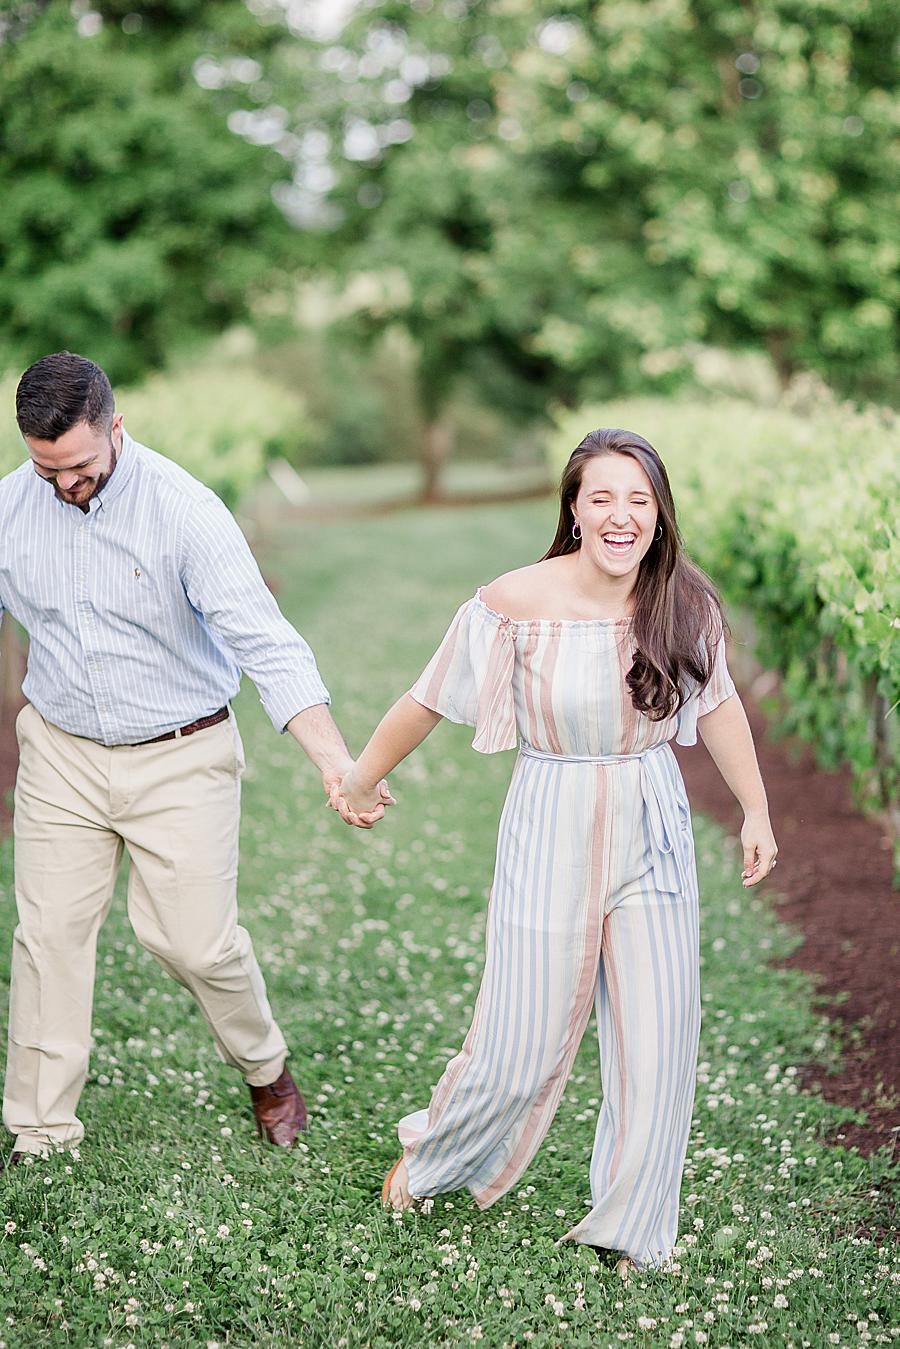 Laughing at this Castleton by Knoxville Wedding Photographer, Amanda May Photos.